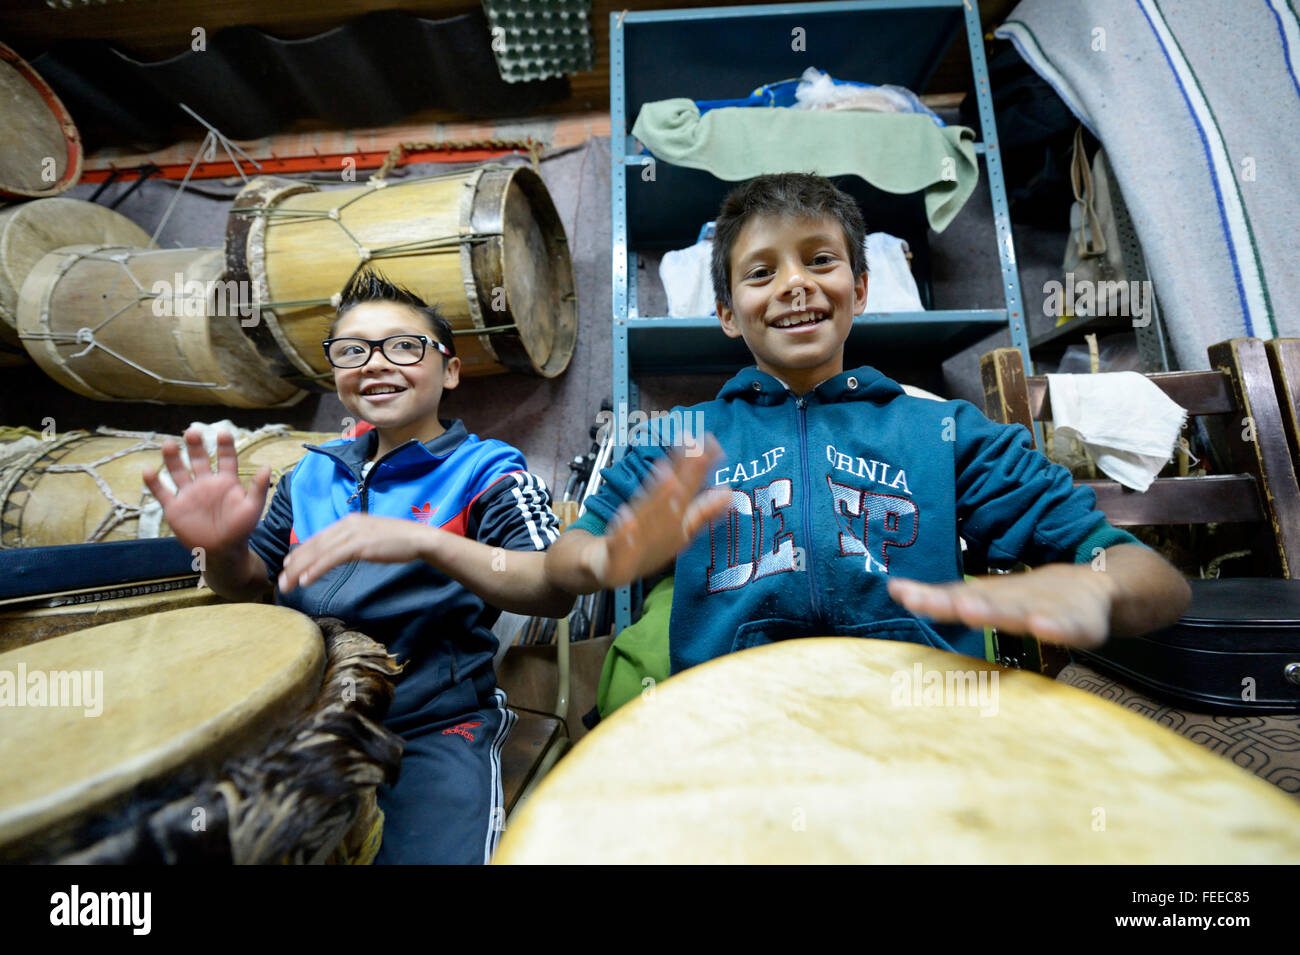 Boys drumming happily, social project, Bogota, Colombia Stock Photo